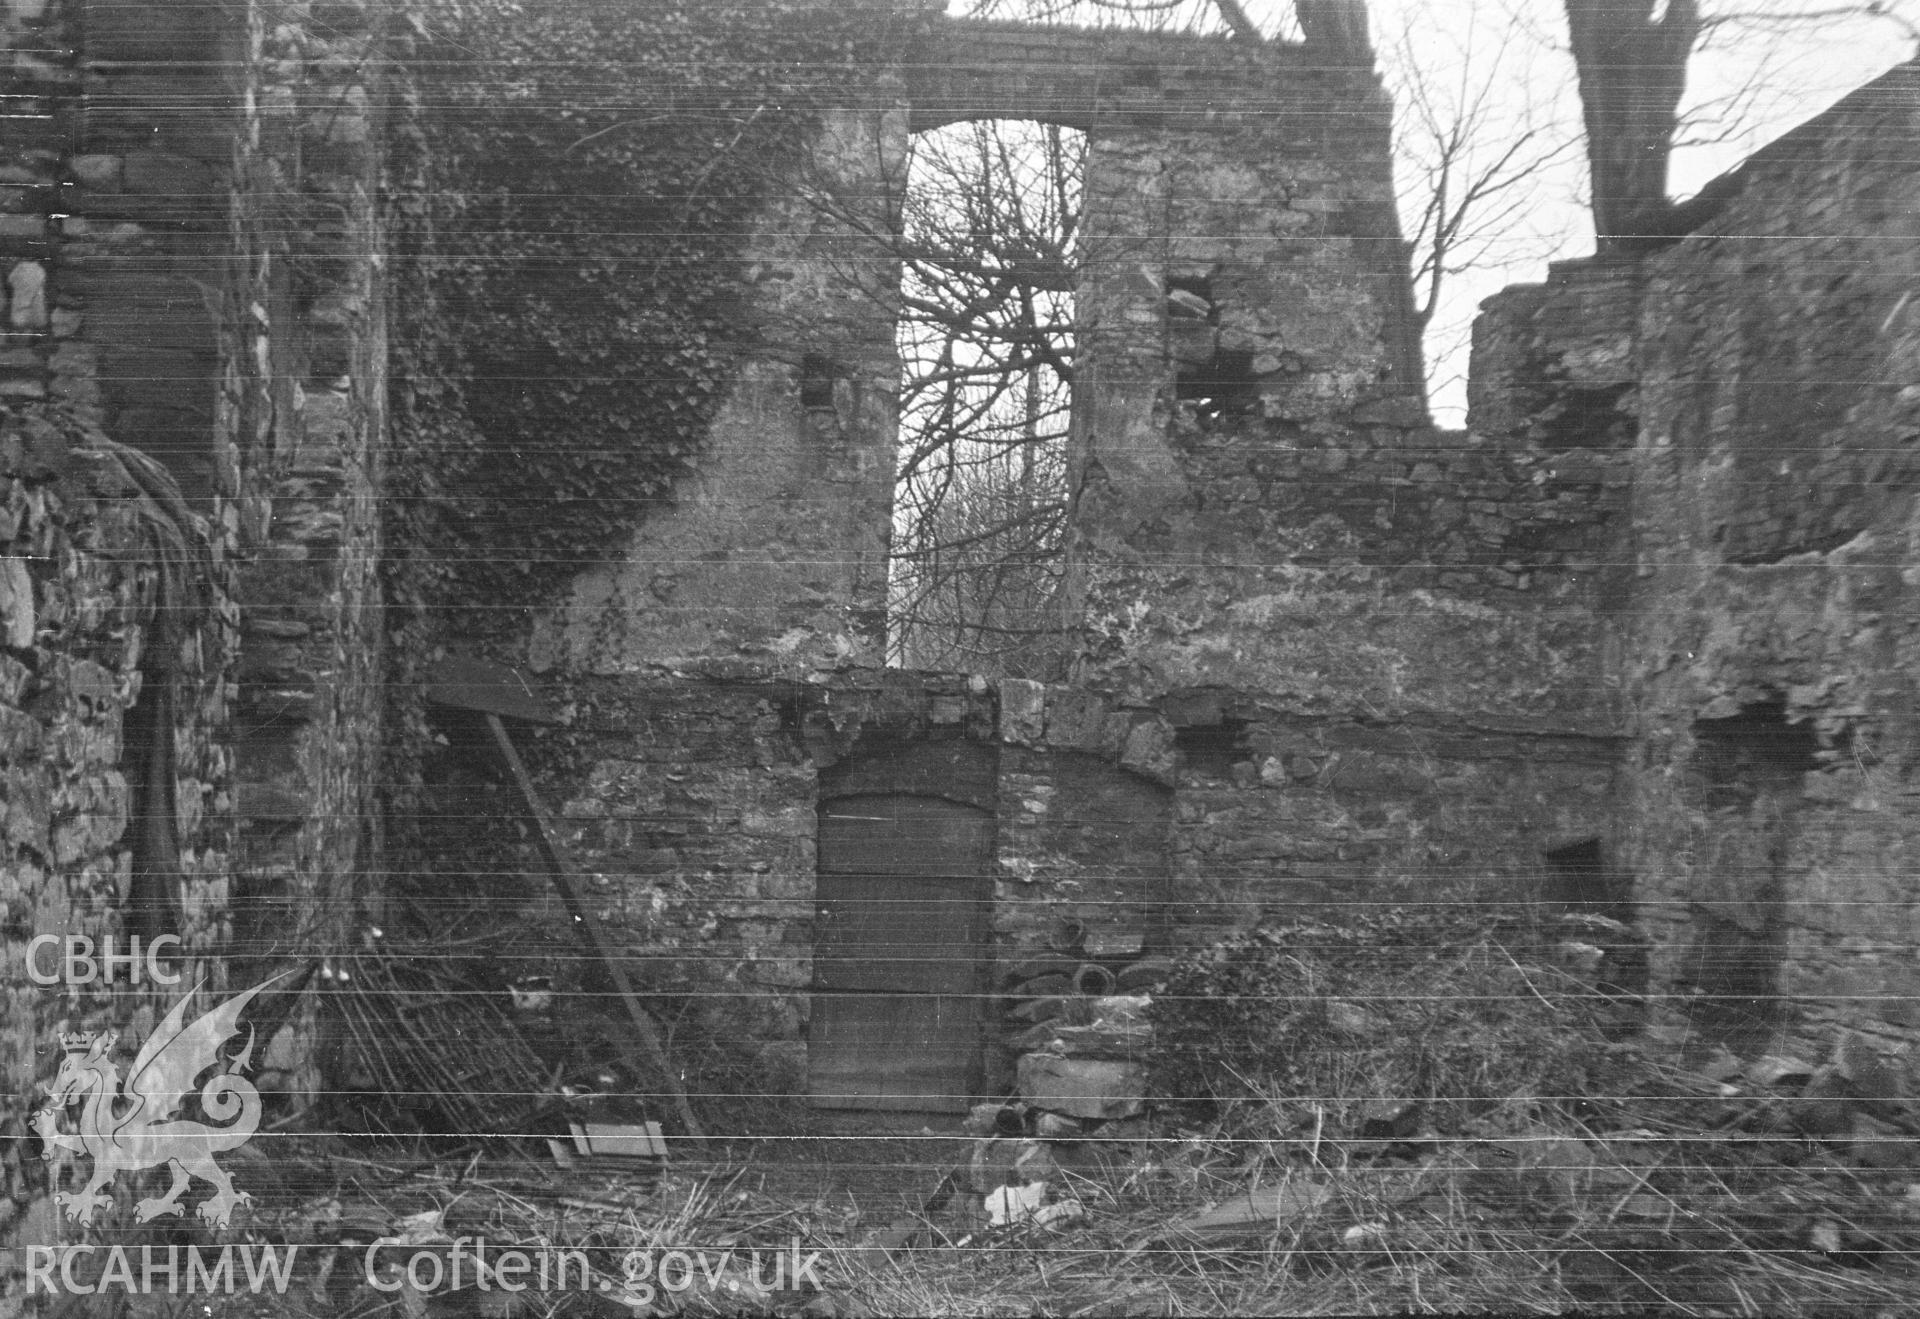 Digital copy of a nitrate negative showing view of White Friars, Denbigh.